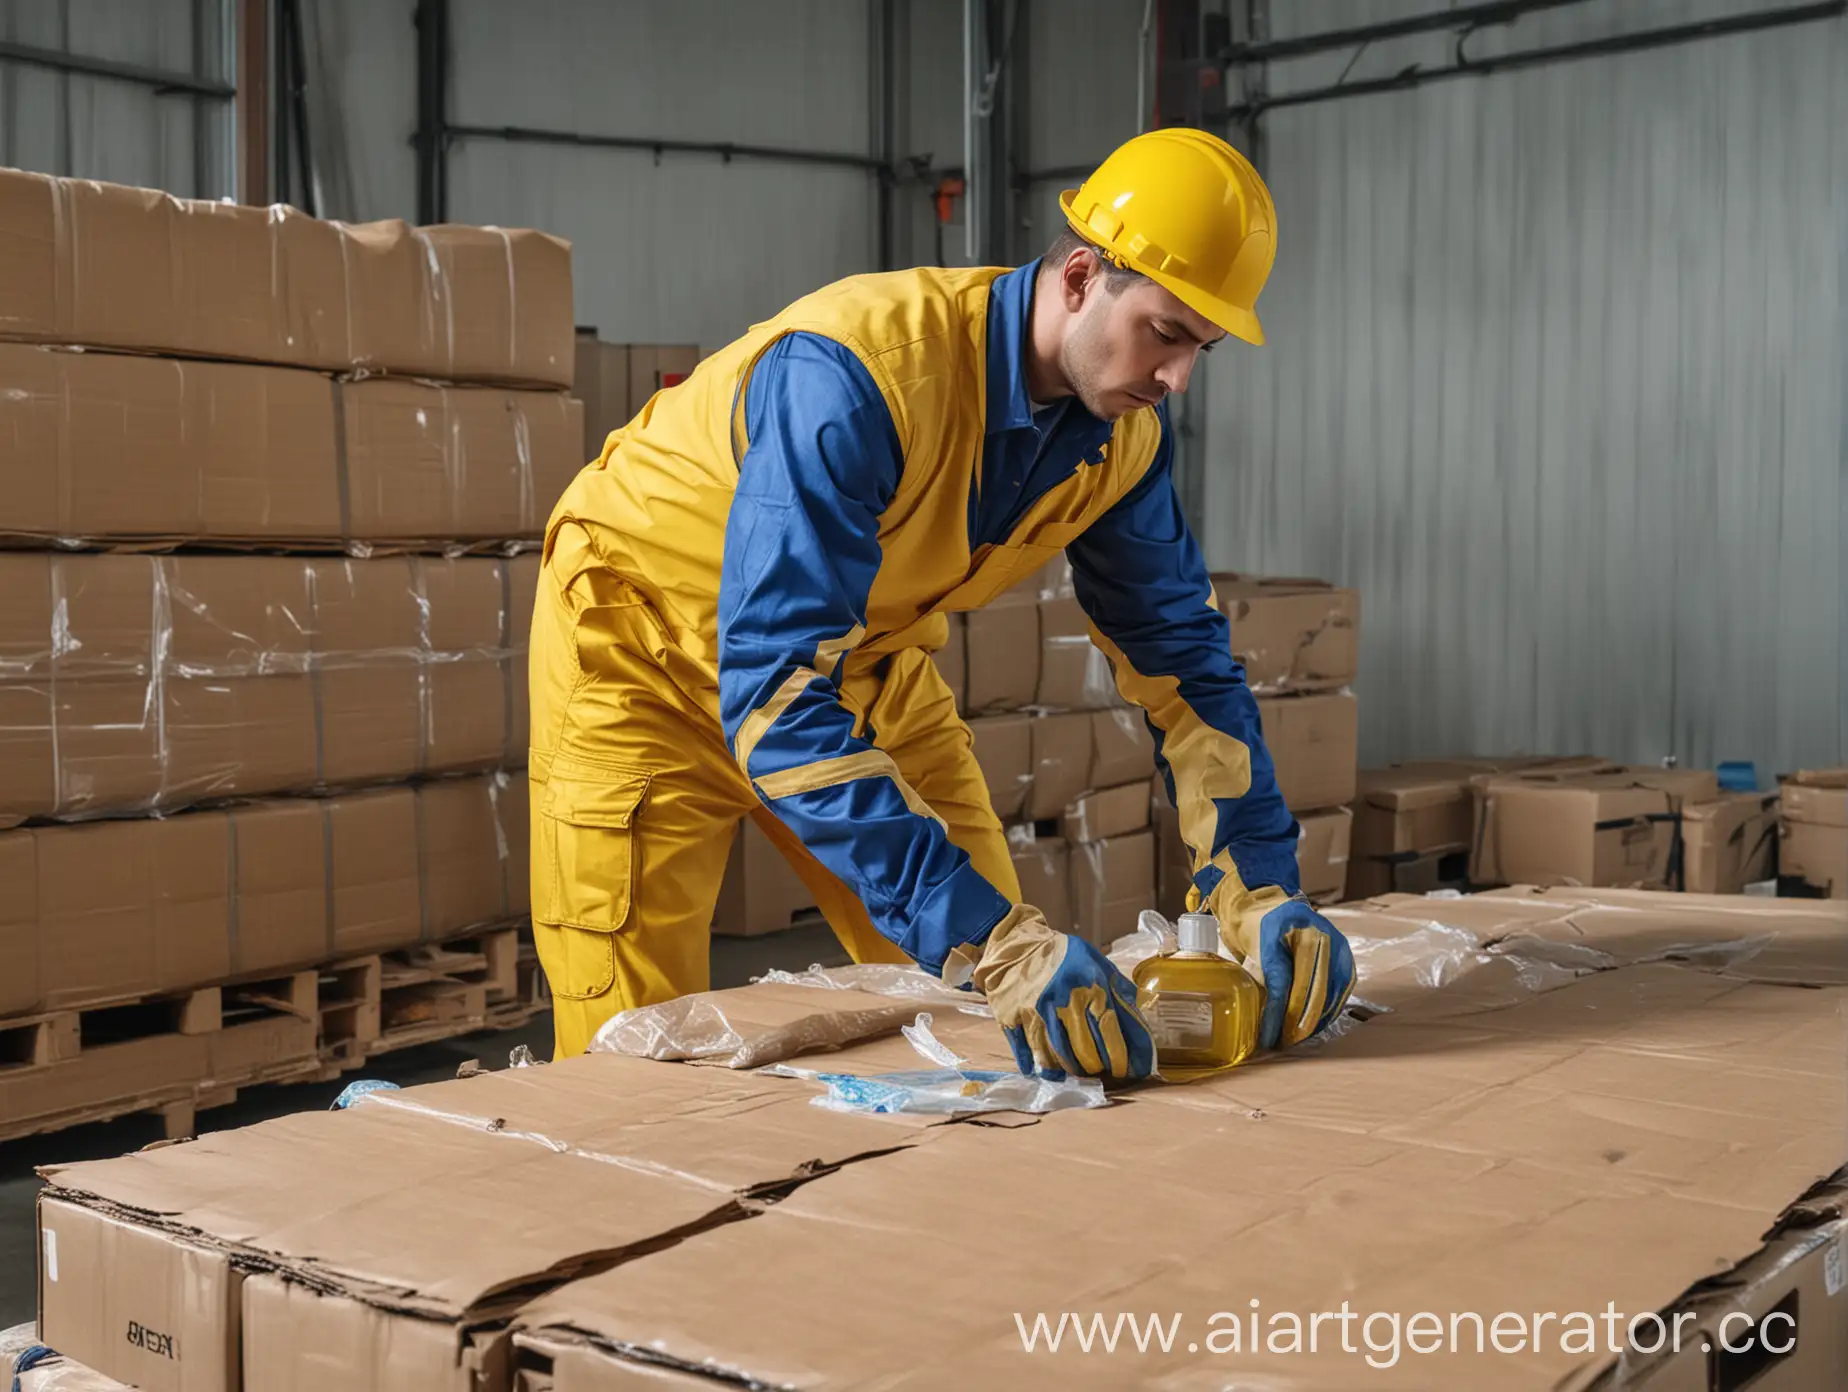 YellowBlue-Outfit-Worker-Packing-FatOil-Raw-Material